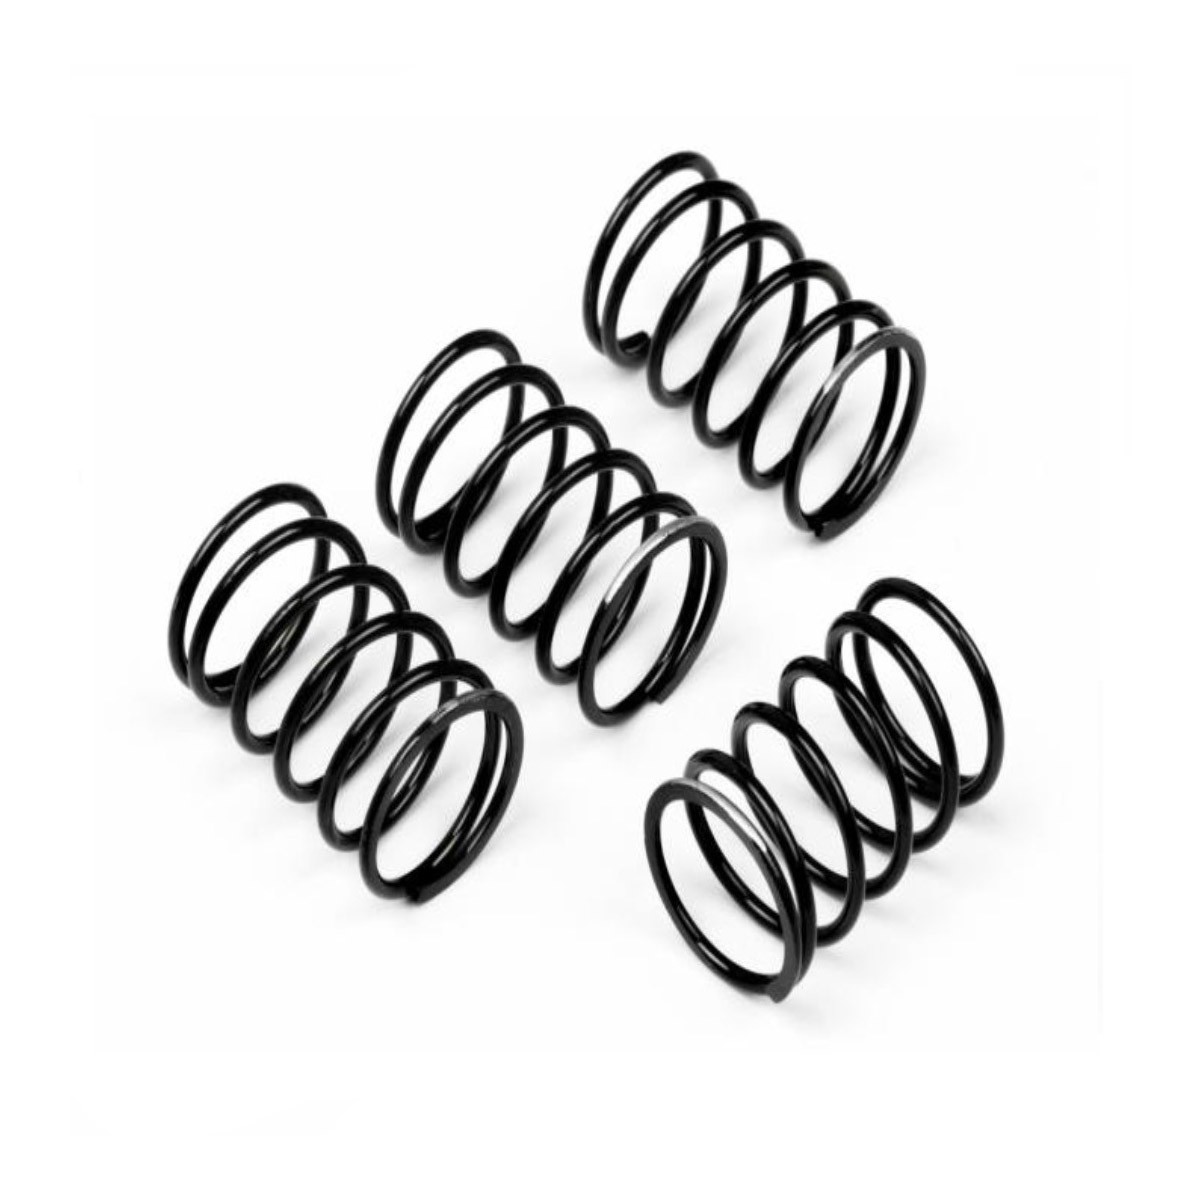  Replacement springs (factory height) for Mitsubishi Colt Kayaba (2004-2014) Image 1